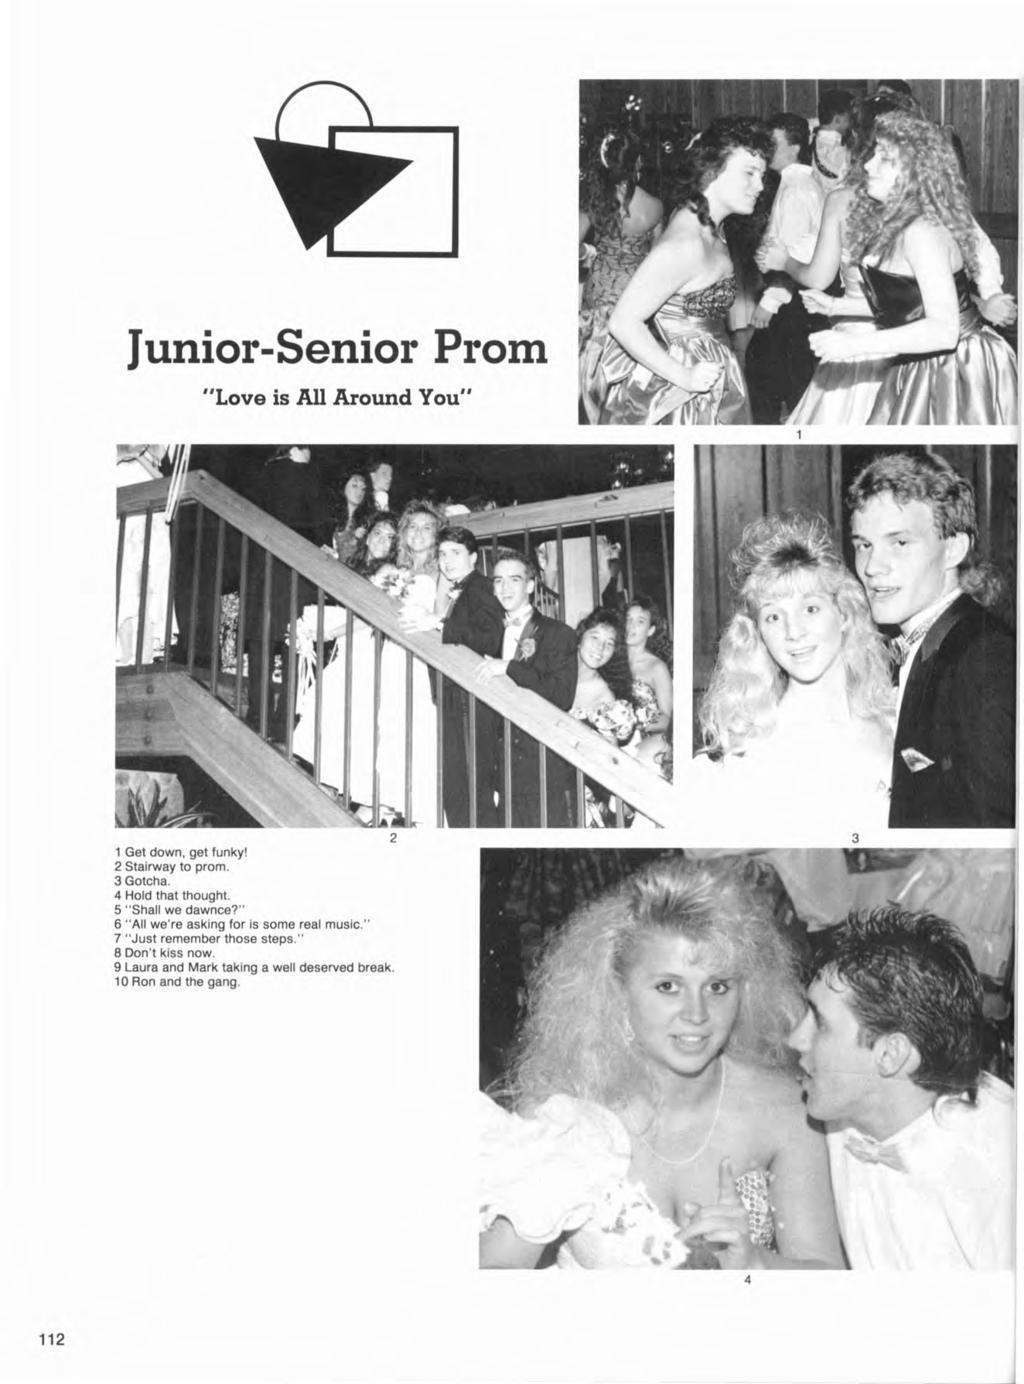 Junior-Senior ProD} "Love is All Around You" 2 1 Get down, get funkyl 2 Stairway to prom. 3 Gotcha. 4 Hold that thought. 5 "Shall we dawnce?